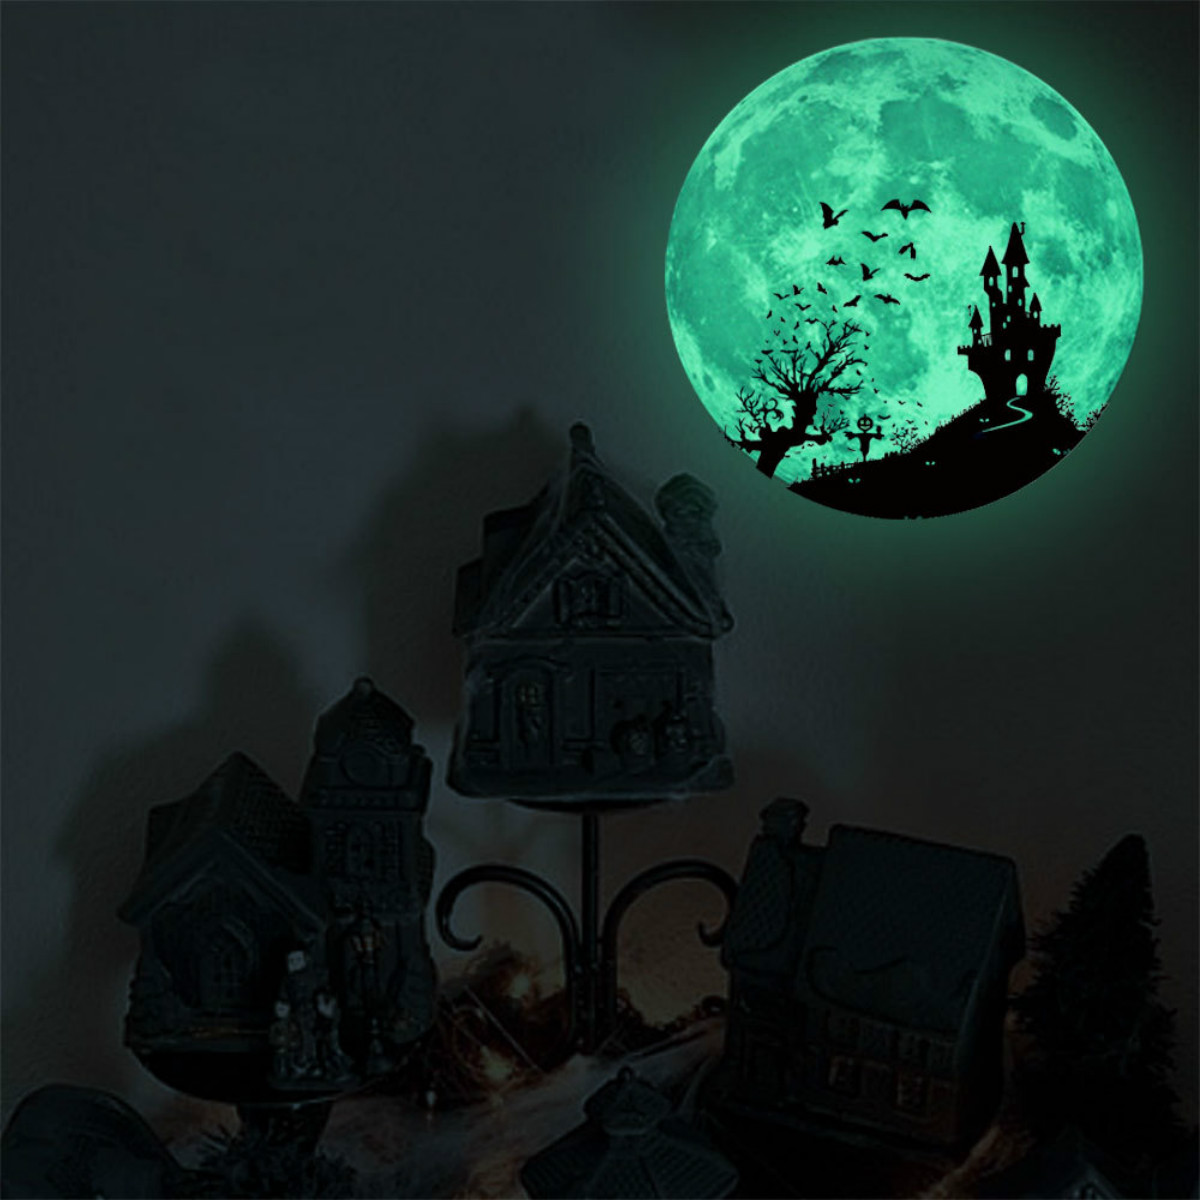 Halloween-Moon-Bat-Glow-In-Dark-Wall-Sticker-Luminous-Removable-Party-Room-Decorations-1585181-9